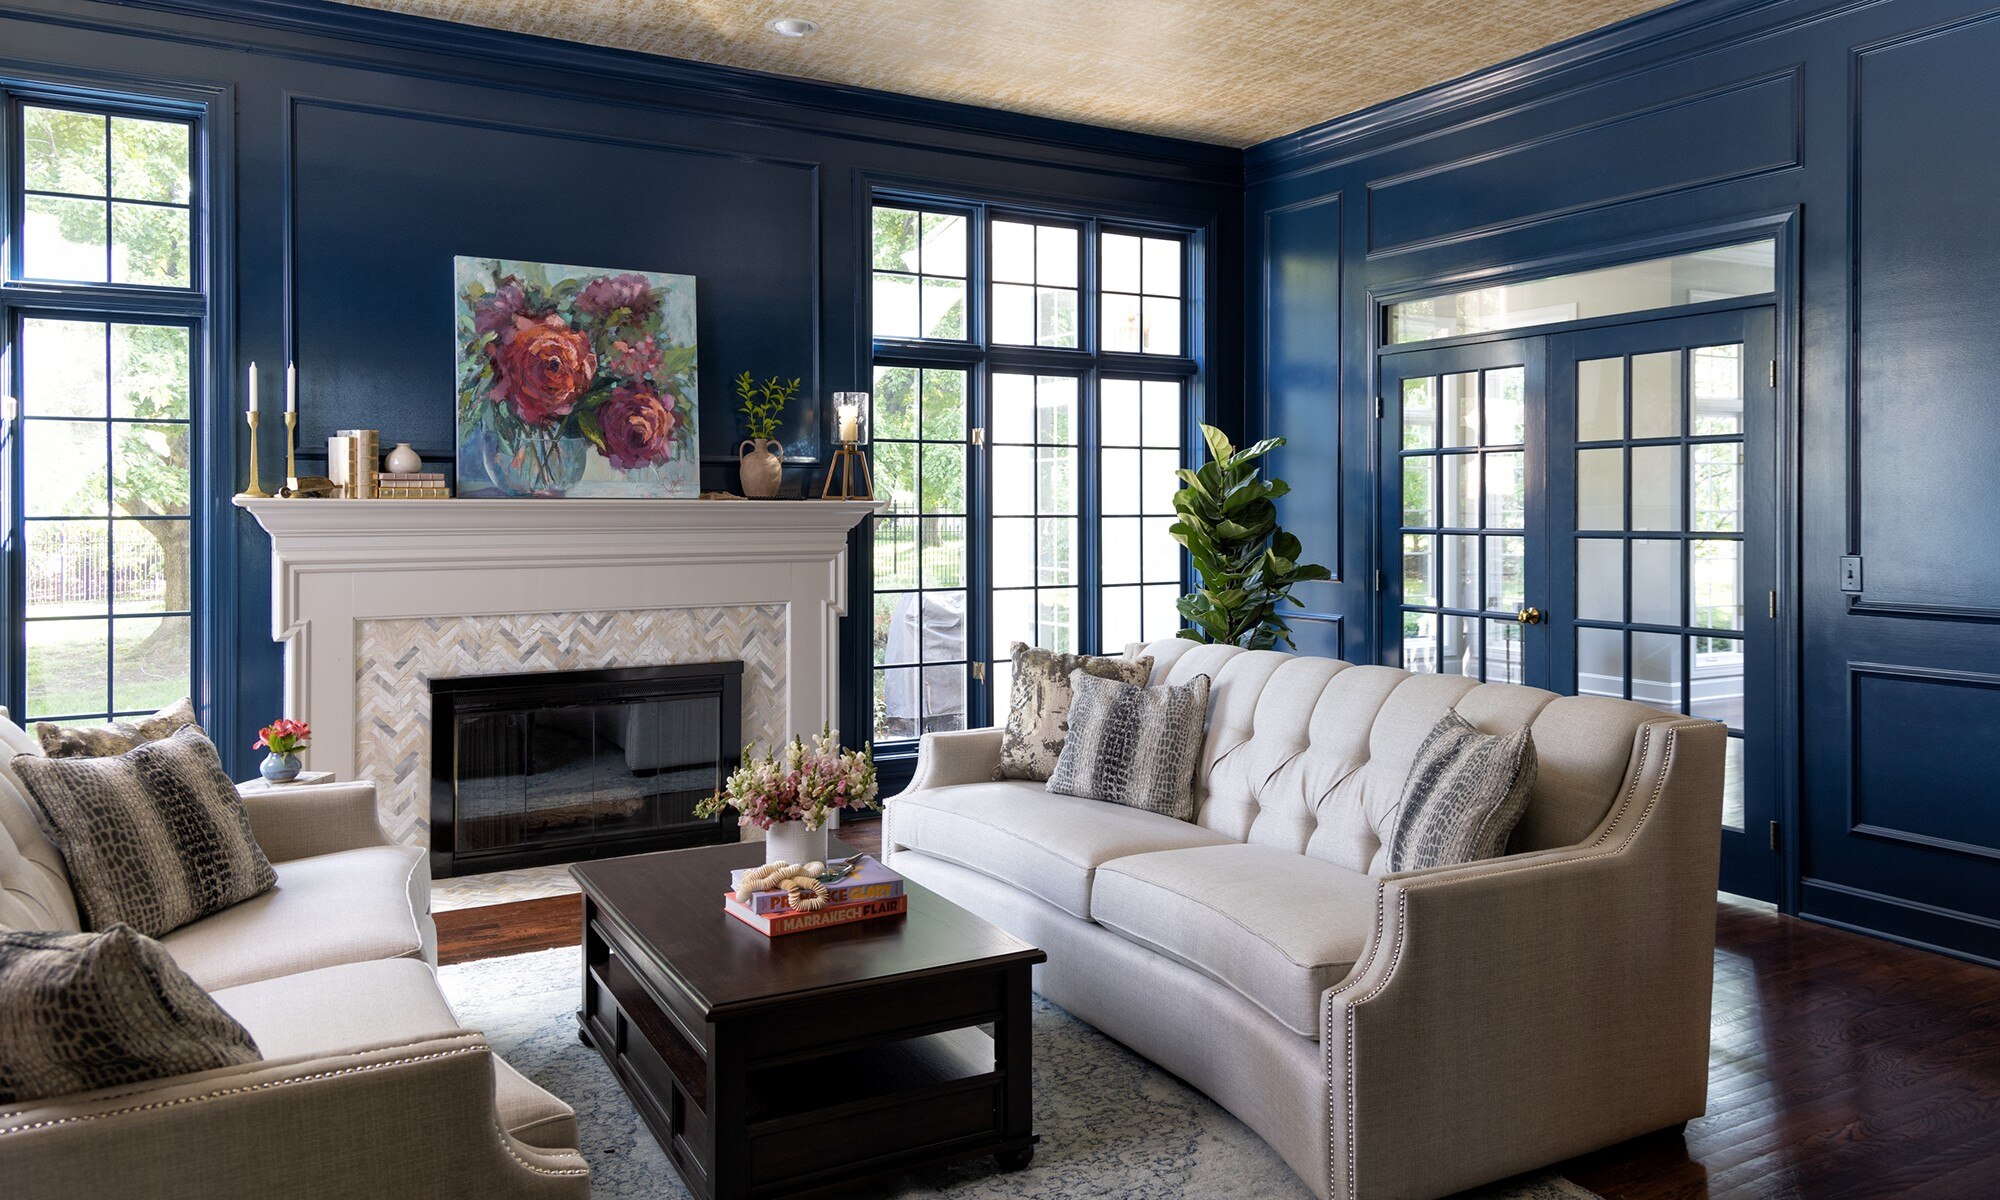 Renovated living room with dark blue paneled walls, floor-to-ceiling windows, fireplace with gray & beige marble mosaic surround & white mantel.